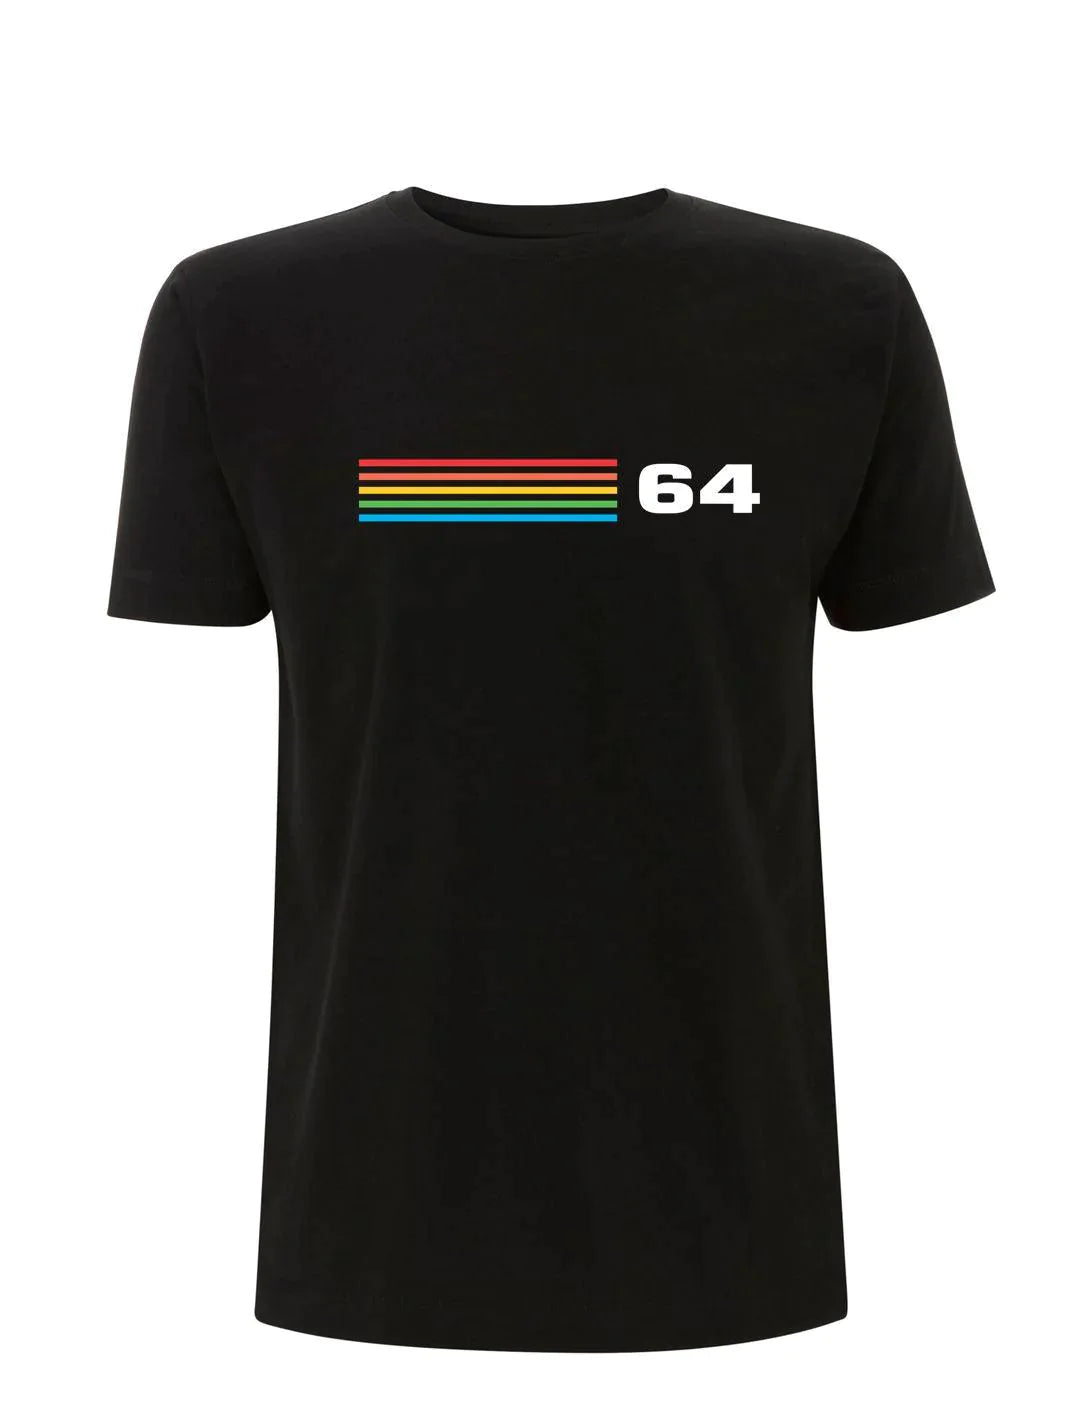 OK COMPUTER: T-Shirt Inspired by Radiohead & The Commodore 64 - SOUND IS COLOUR